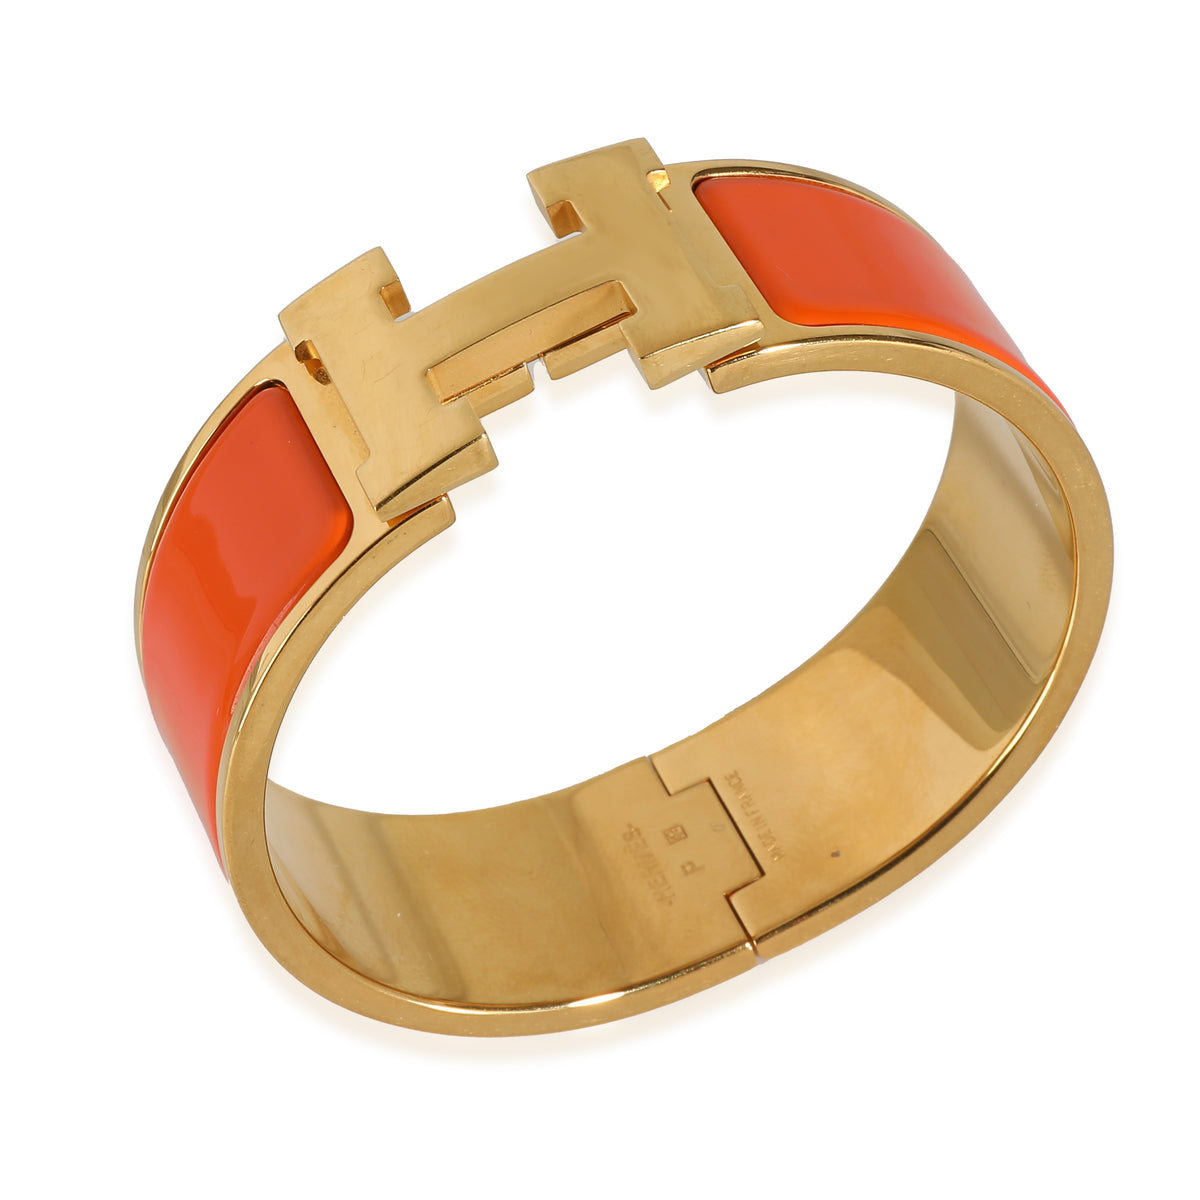 Clic Clac Bracelet in  Gold Plated